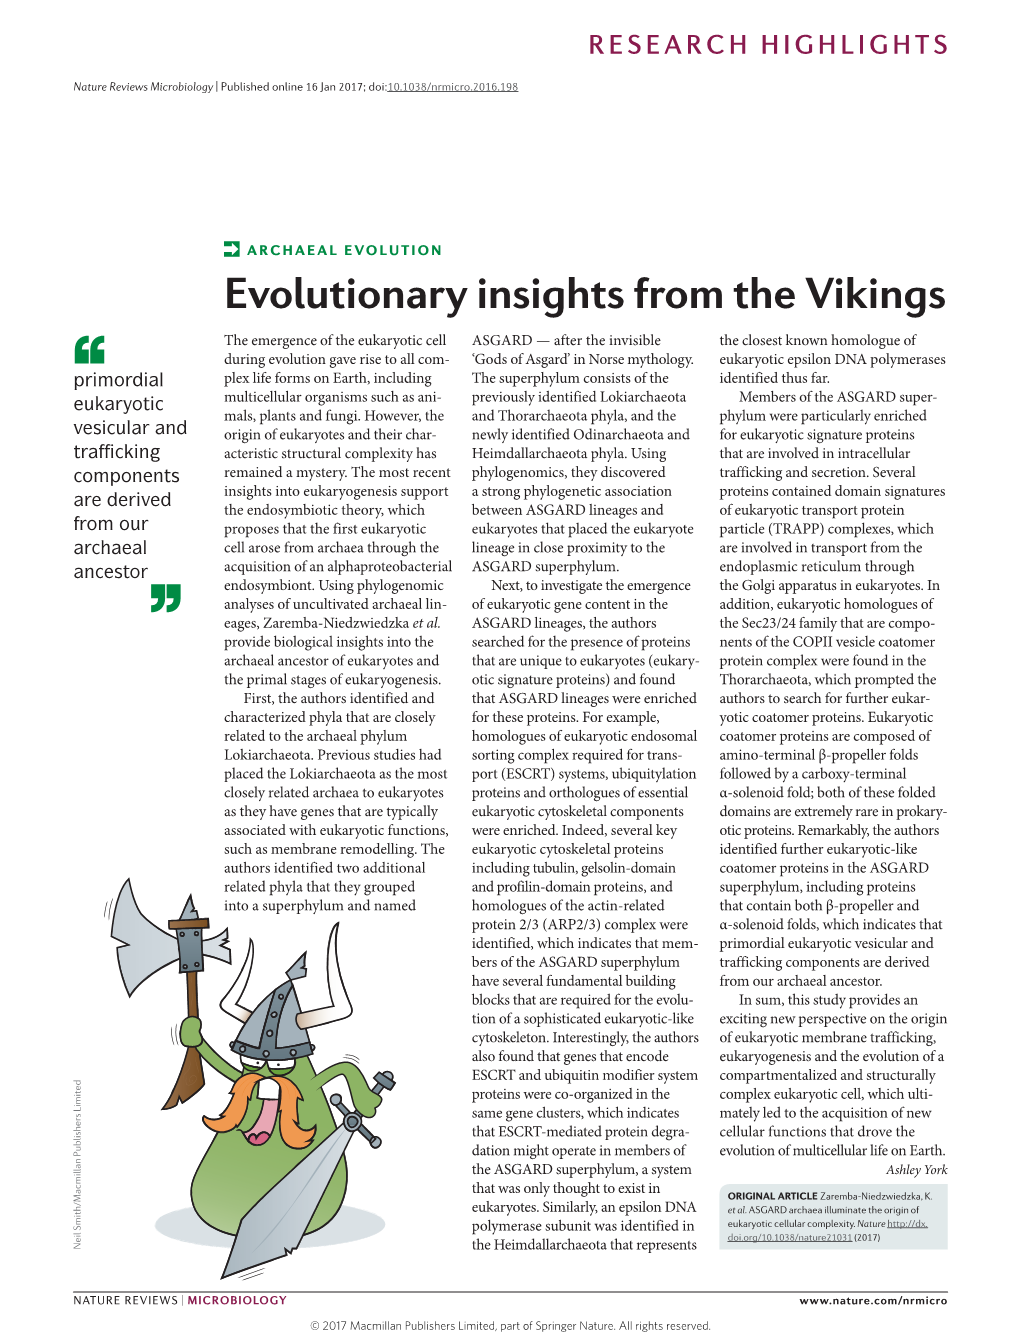 ARCHAEAL EVOLUTION Evolutionary Insights from the Vikings